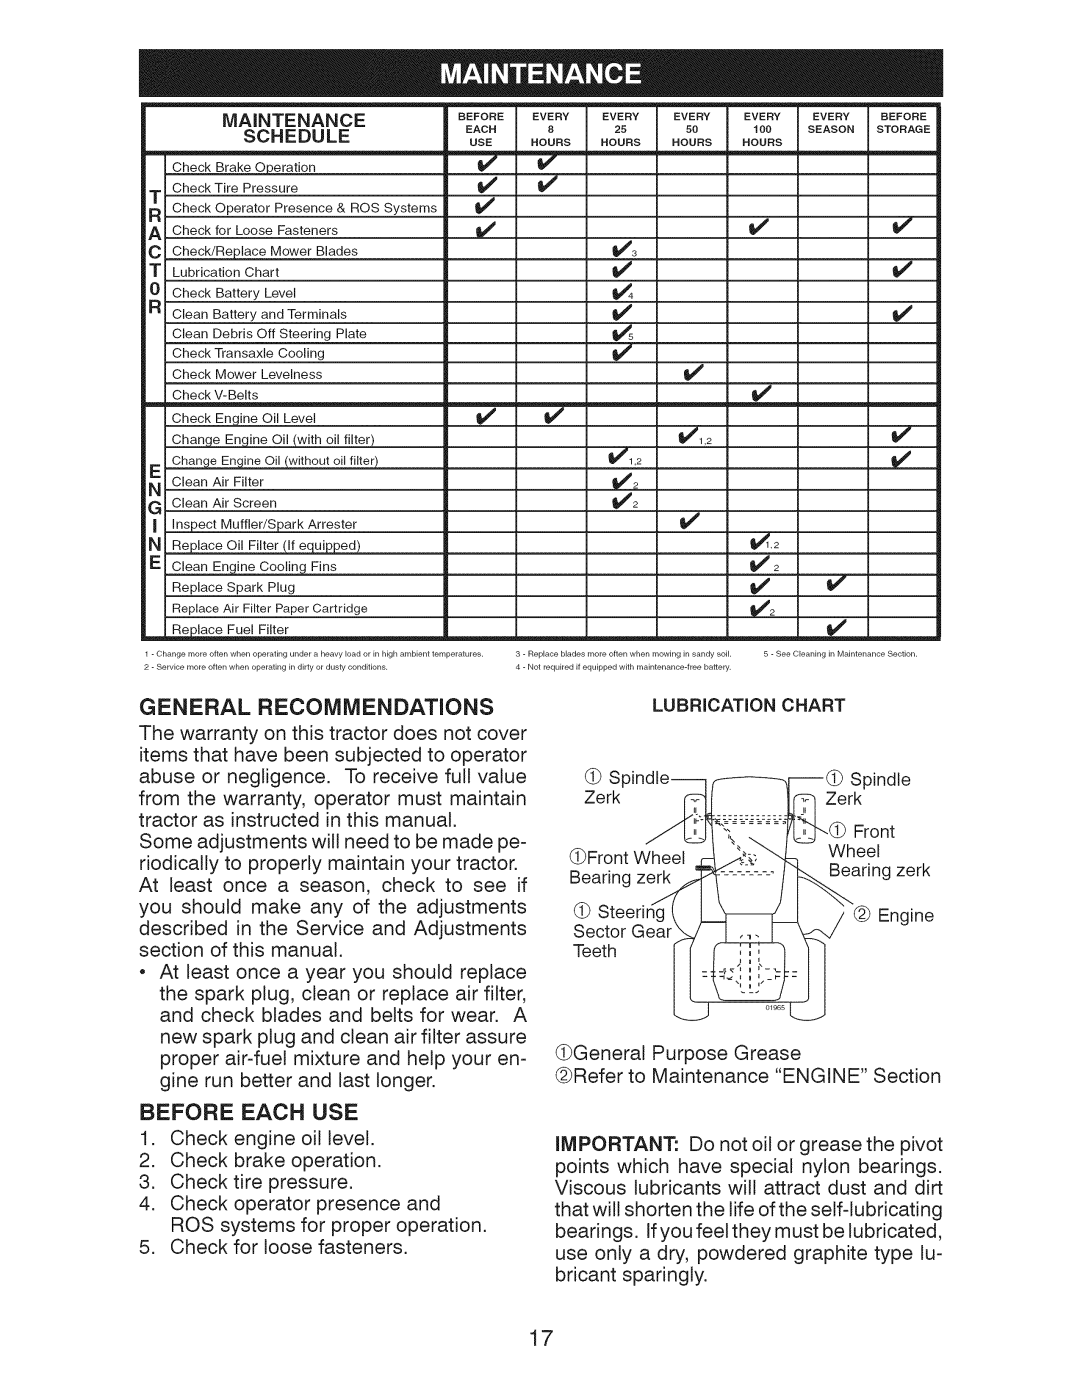 Craftsman 917.289283 owner manual General Recommendations, Before Each Use, General Purpose Grease, Schedule, Lubrication 